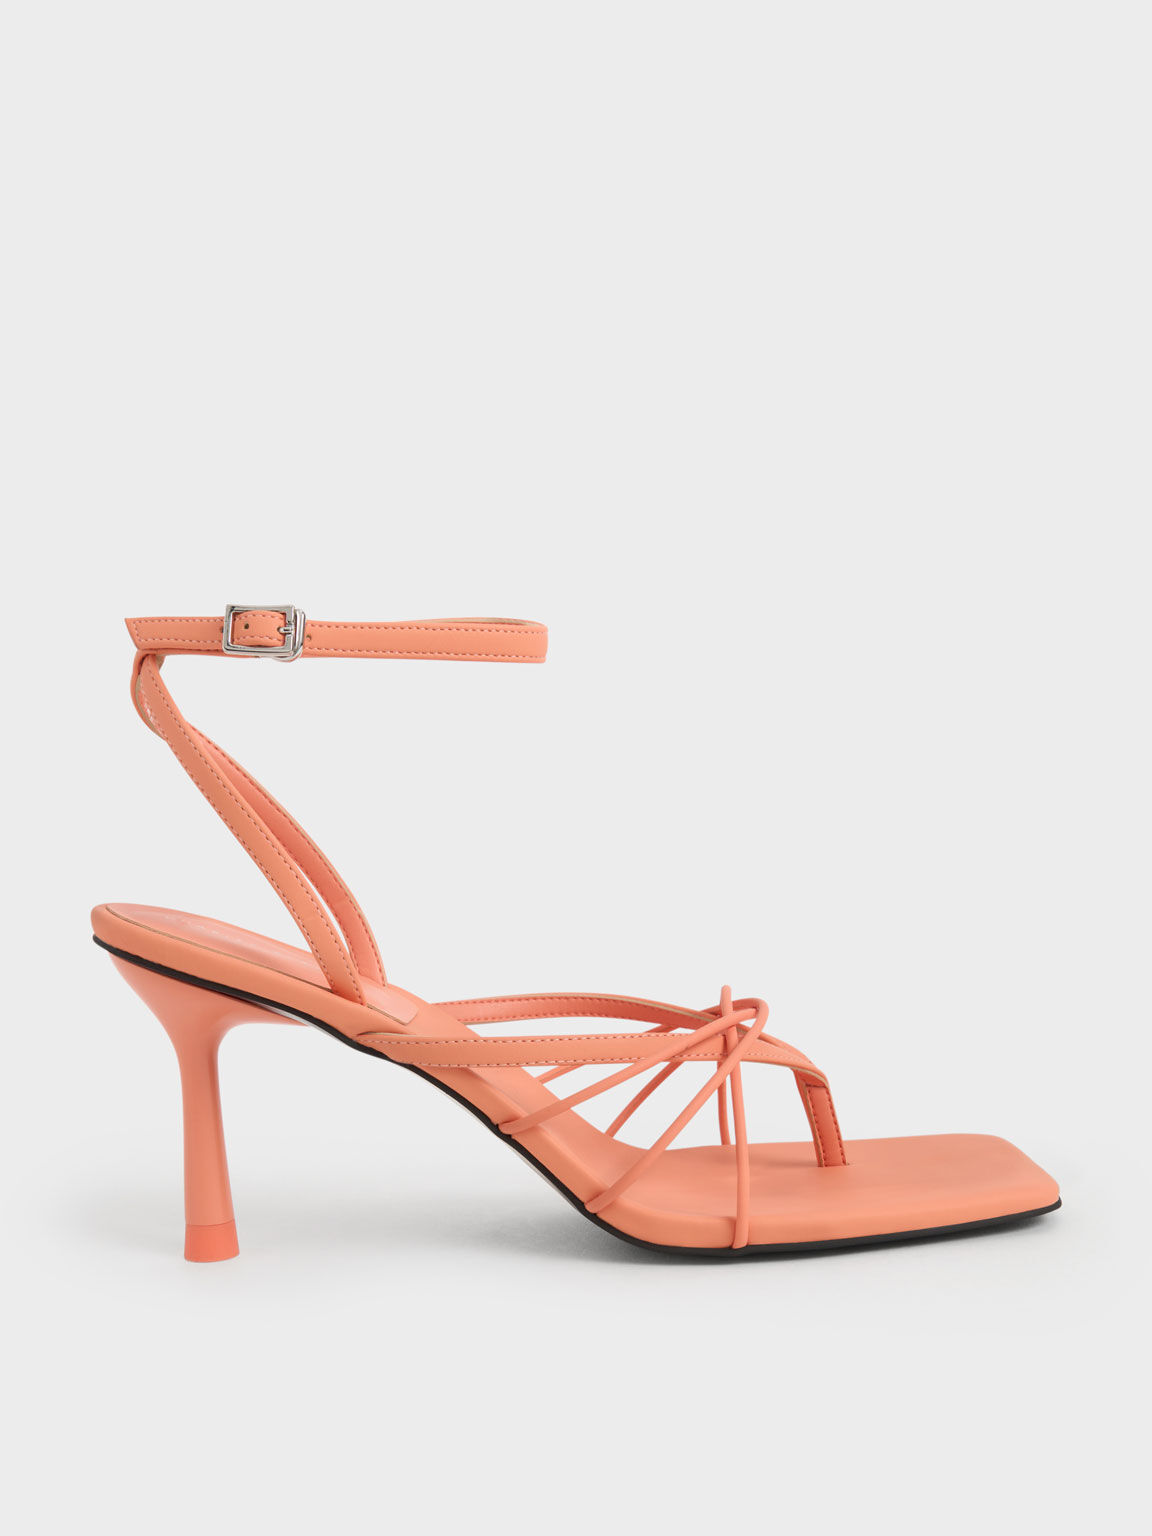 Cute heels and I love that color!! | Heels, Peach heels, Fashion shoes